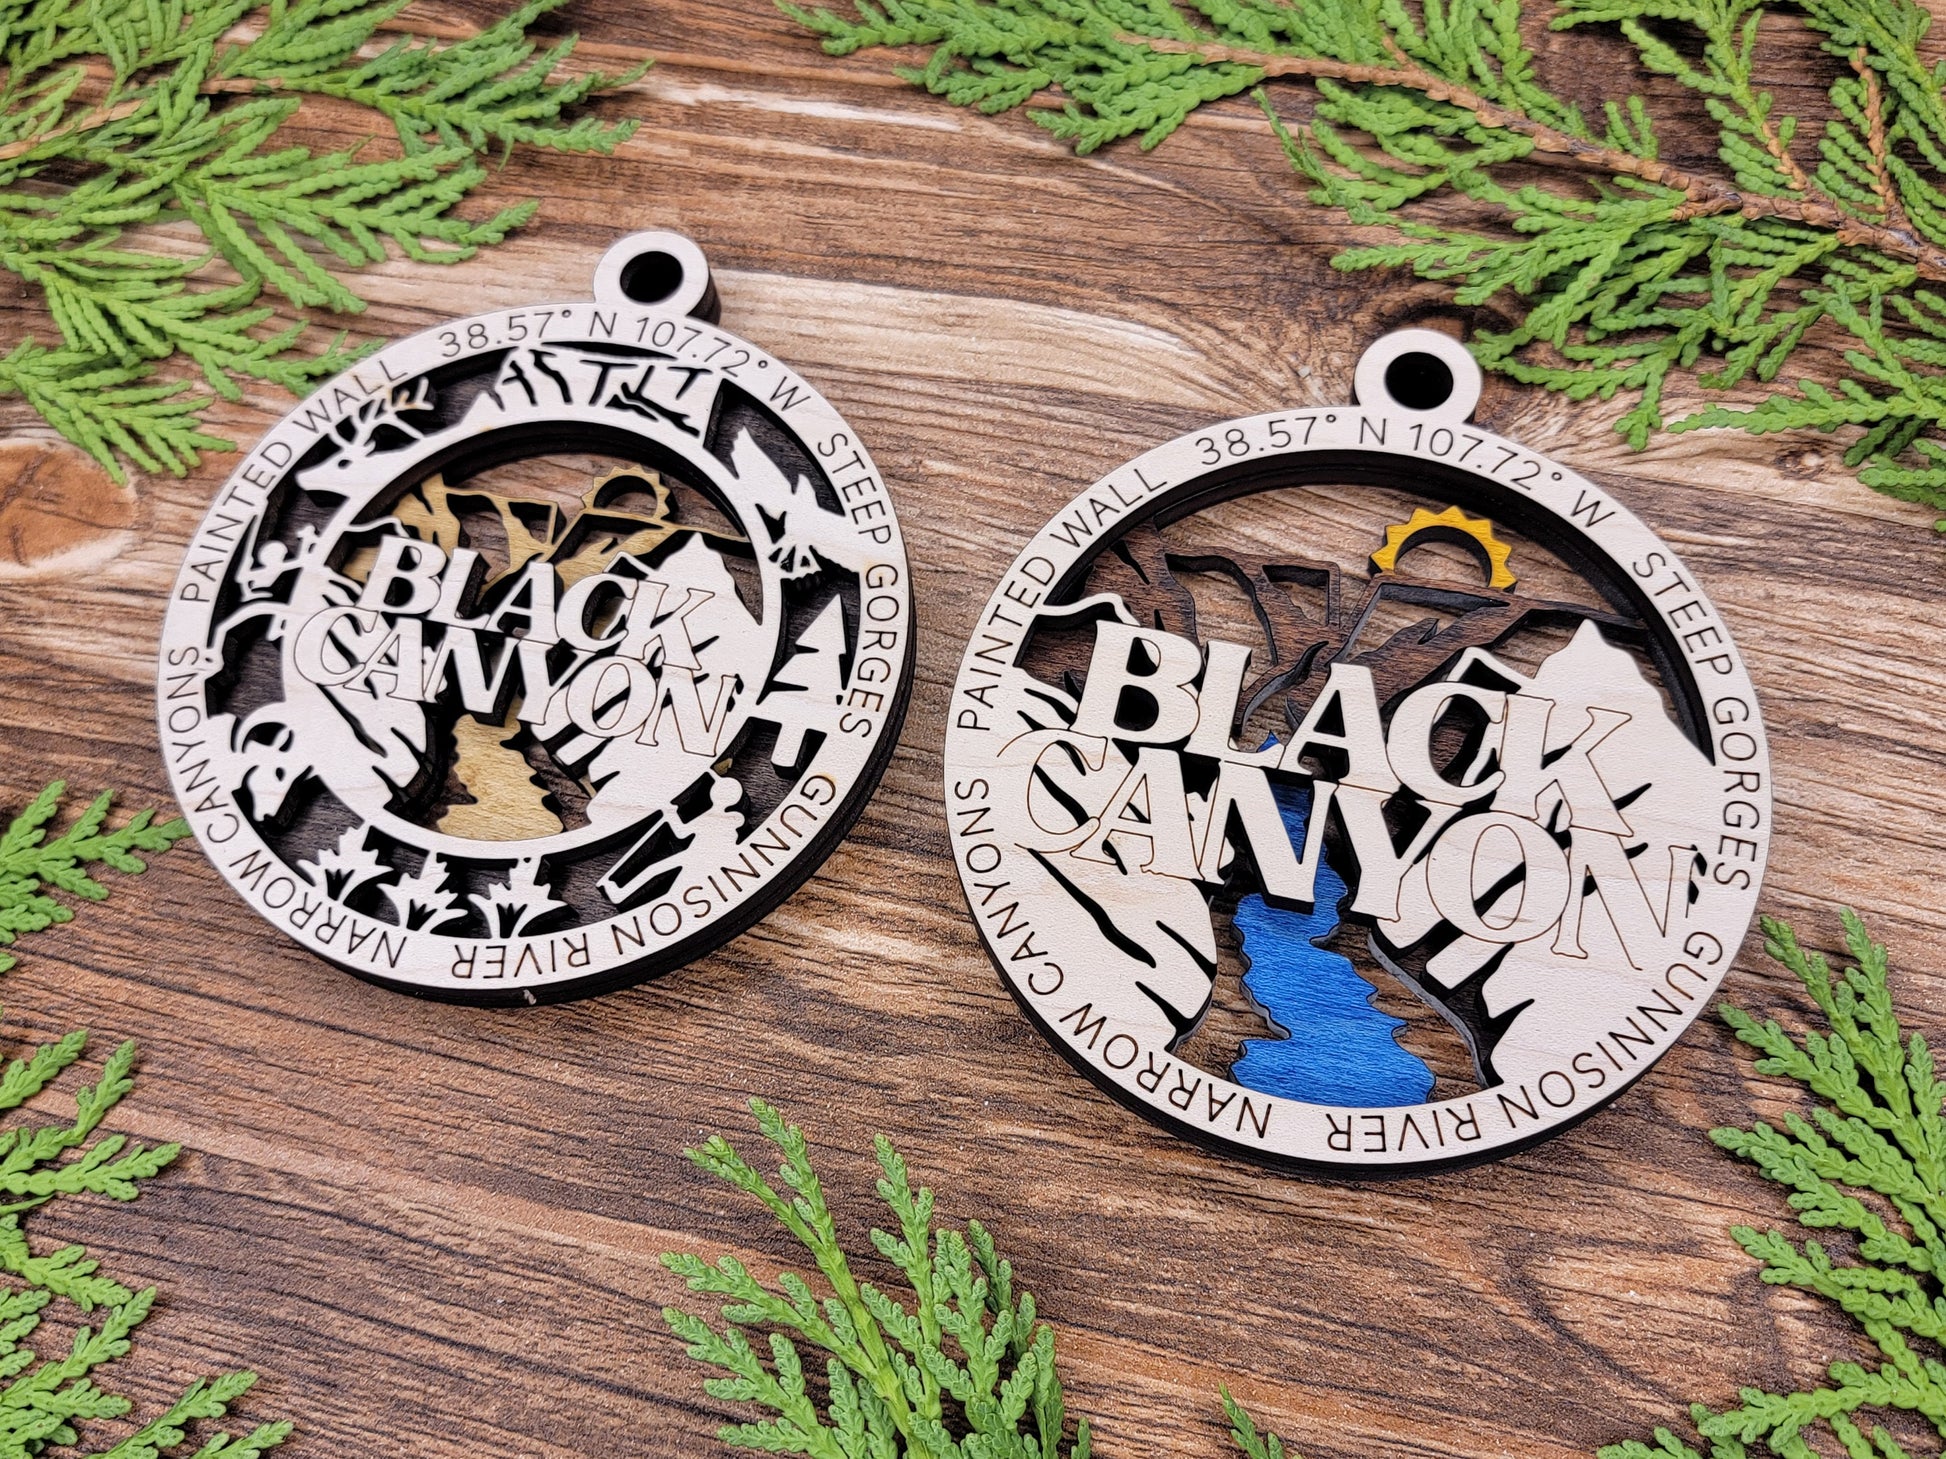 Black Canyon Park Ornament - Includes 2 Ornaments - Laser Design SVG, PDF, AI File Download - Tested On Glowforge and LightBurn